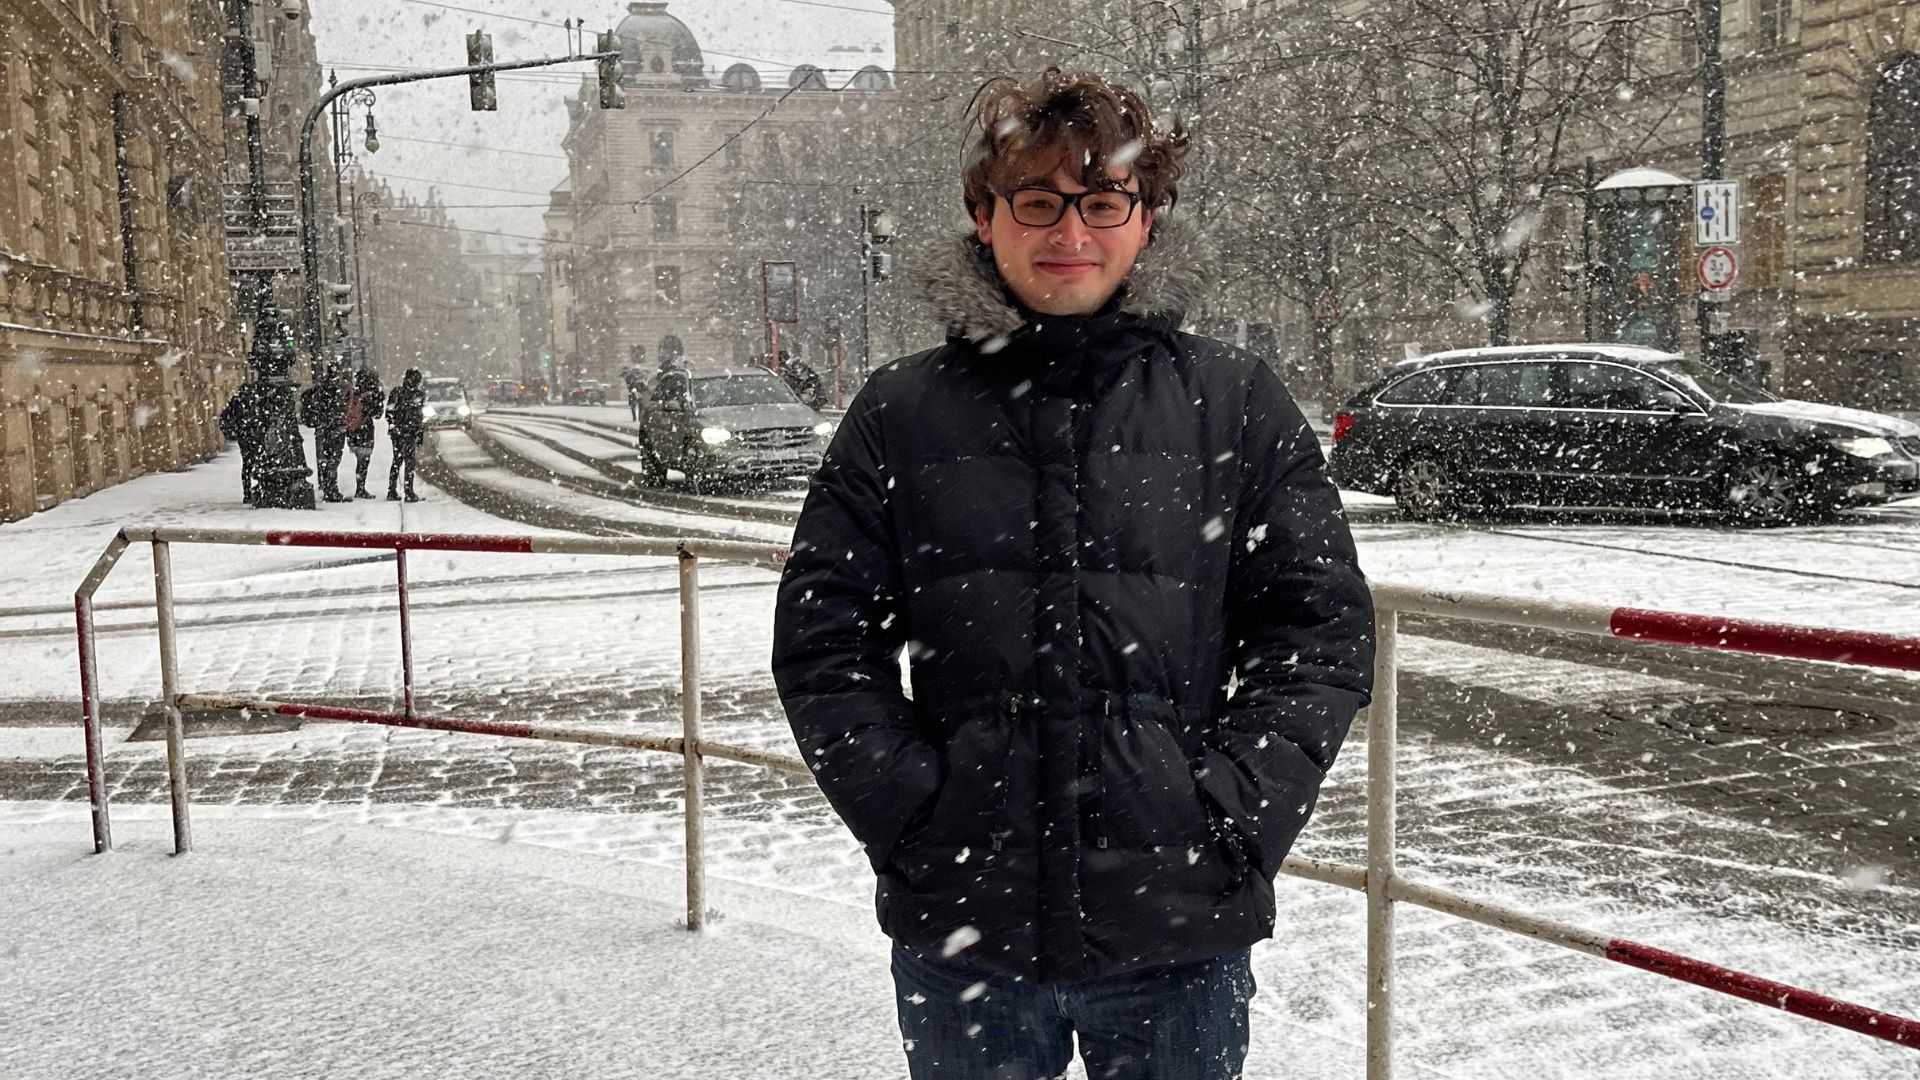 Colton Williams in the streets of Prague while snowing